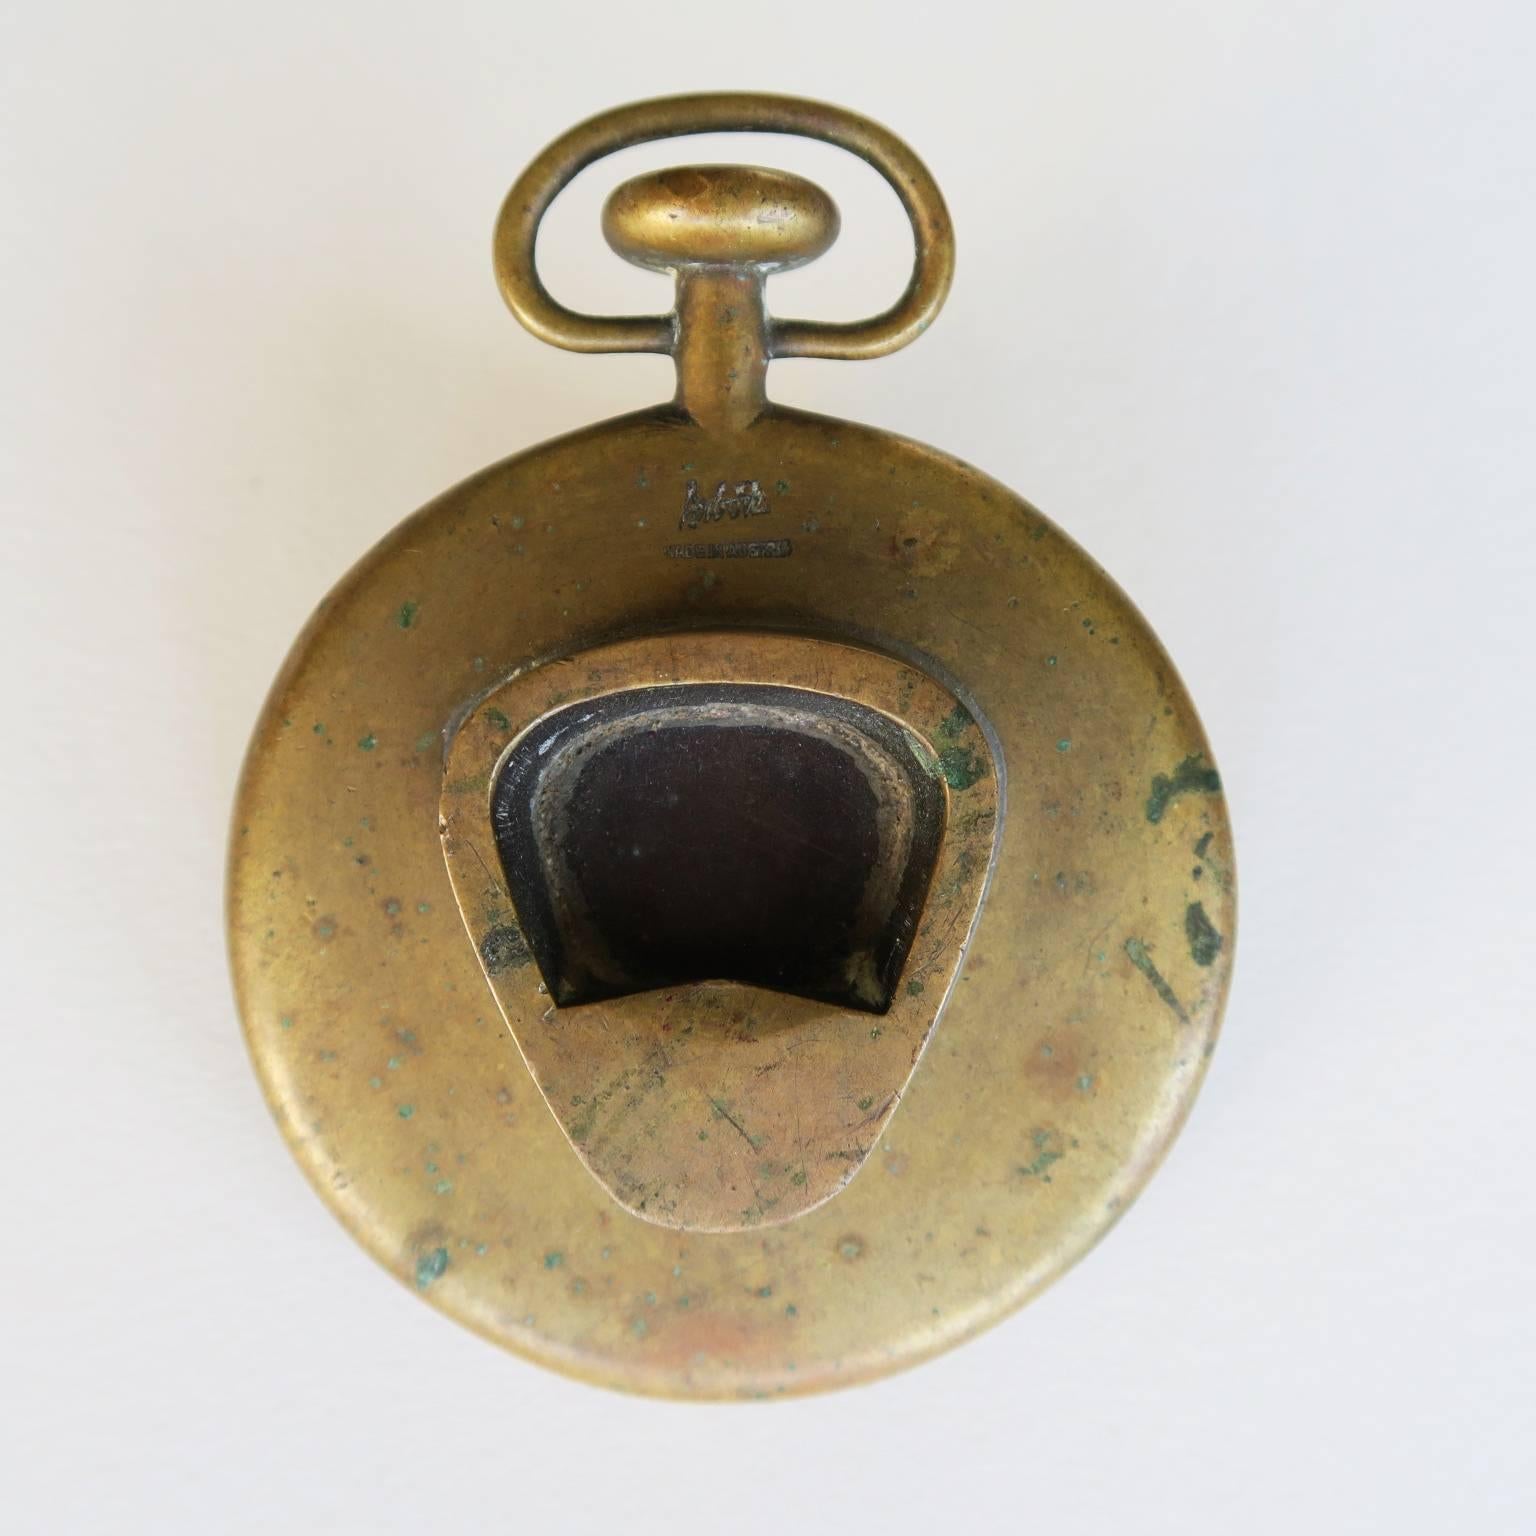 Carl Auböck designed solid brass object, heavy paperweight formed in the shape of an antique pocketwatch with bottle opener, 1950s, Werkstätte Auböck, Austria, signed with impressed mark, 3 1/2 x 2 1/2 x 5/8 inches.